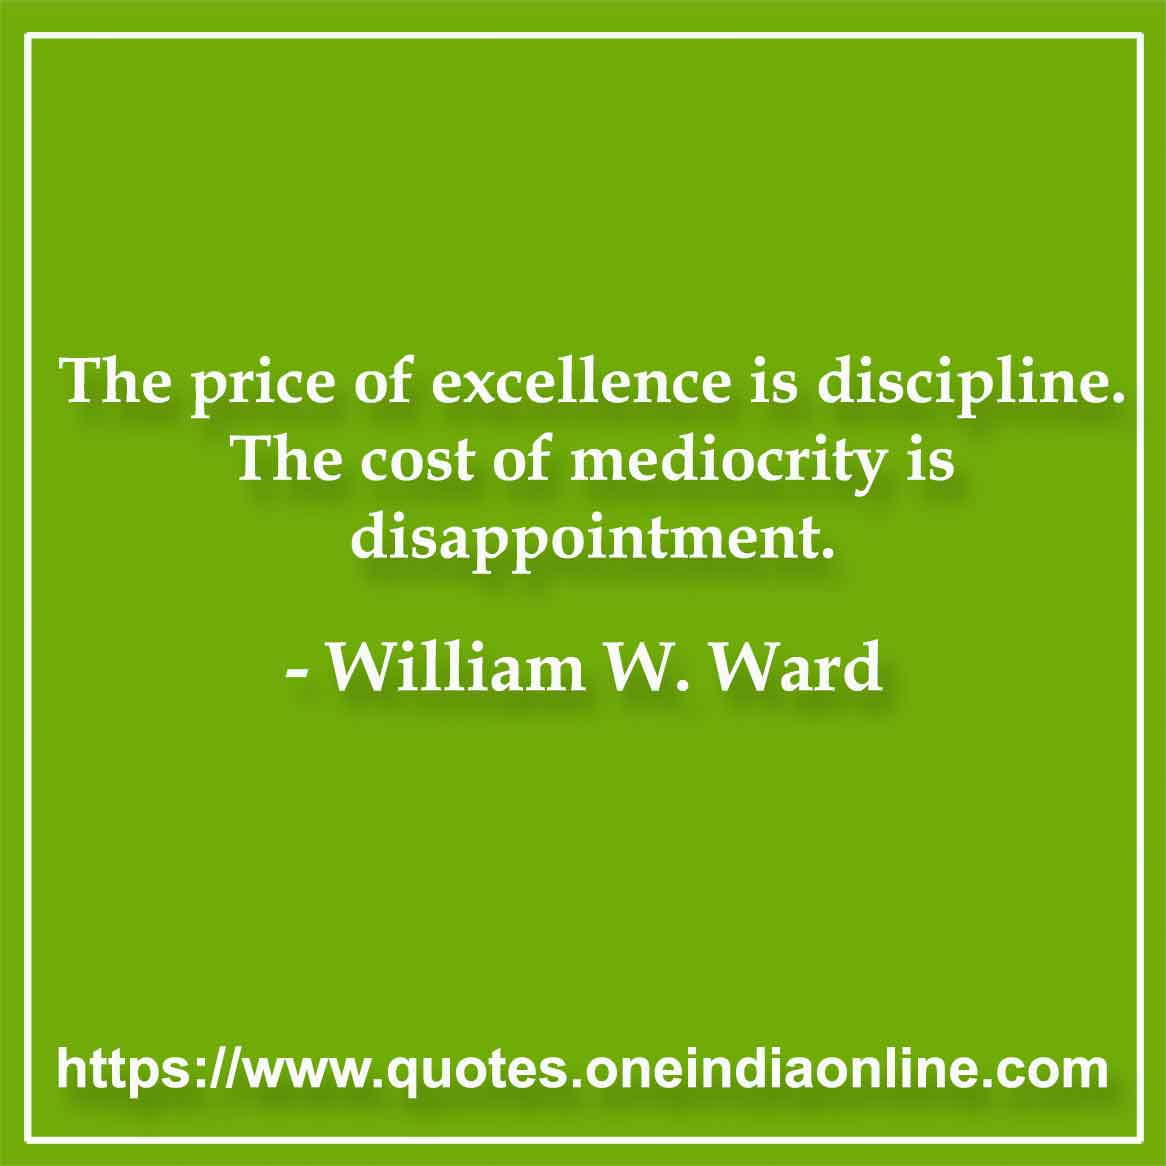 The price of excellence is discipline. The cost of mediocrity is disappointment.

-by William W. Ward